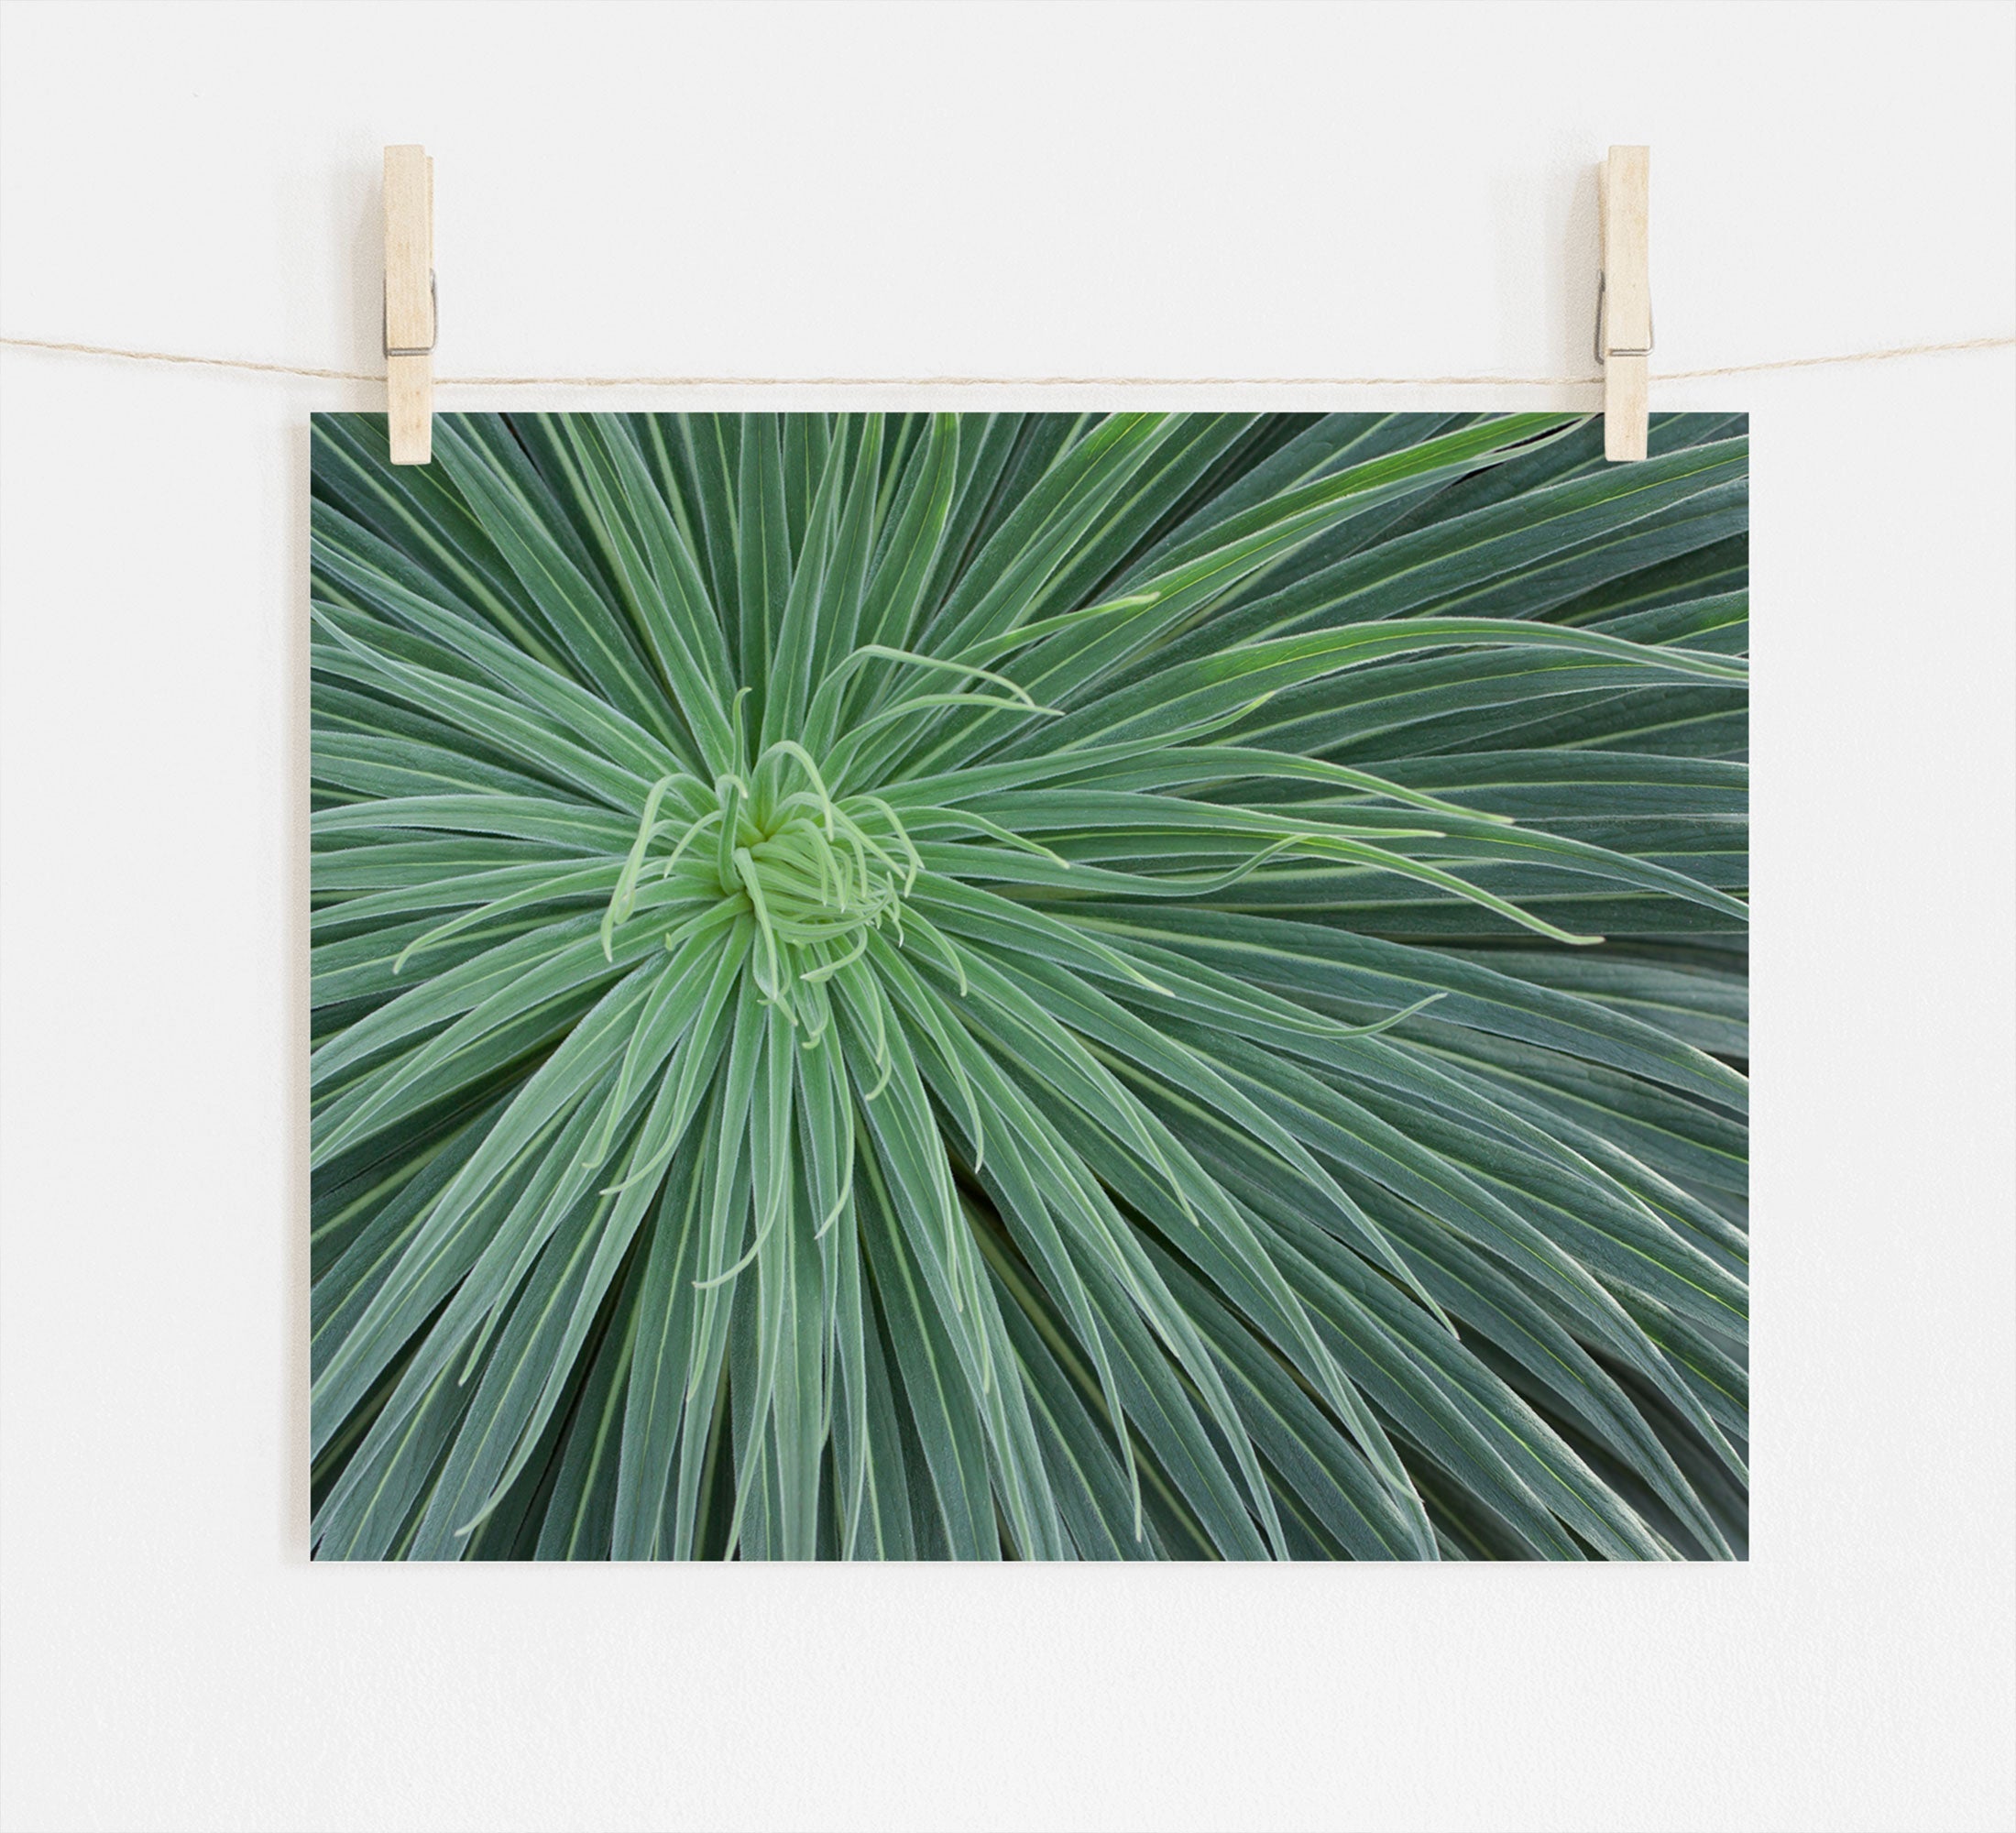 A photograph of a Abstract Green Botanical Print, 'Desert Fireworks' with long, radiating leaves hanging on a wire by two wooden clips against a white wall, printed on archival photographic paper by Offley Green.